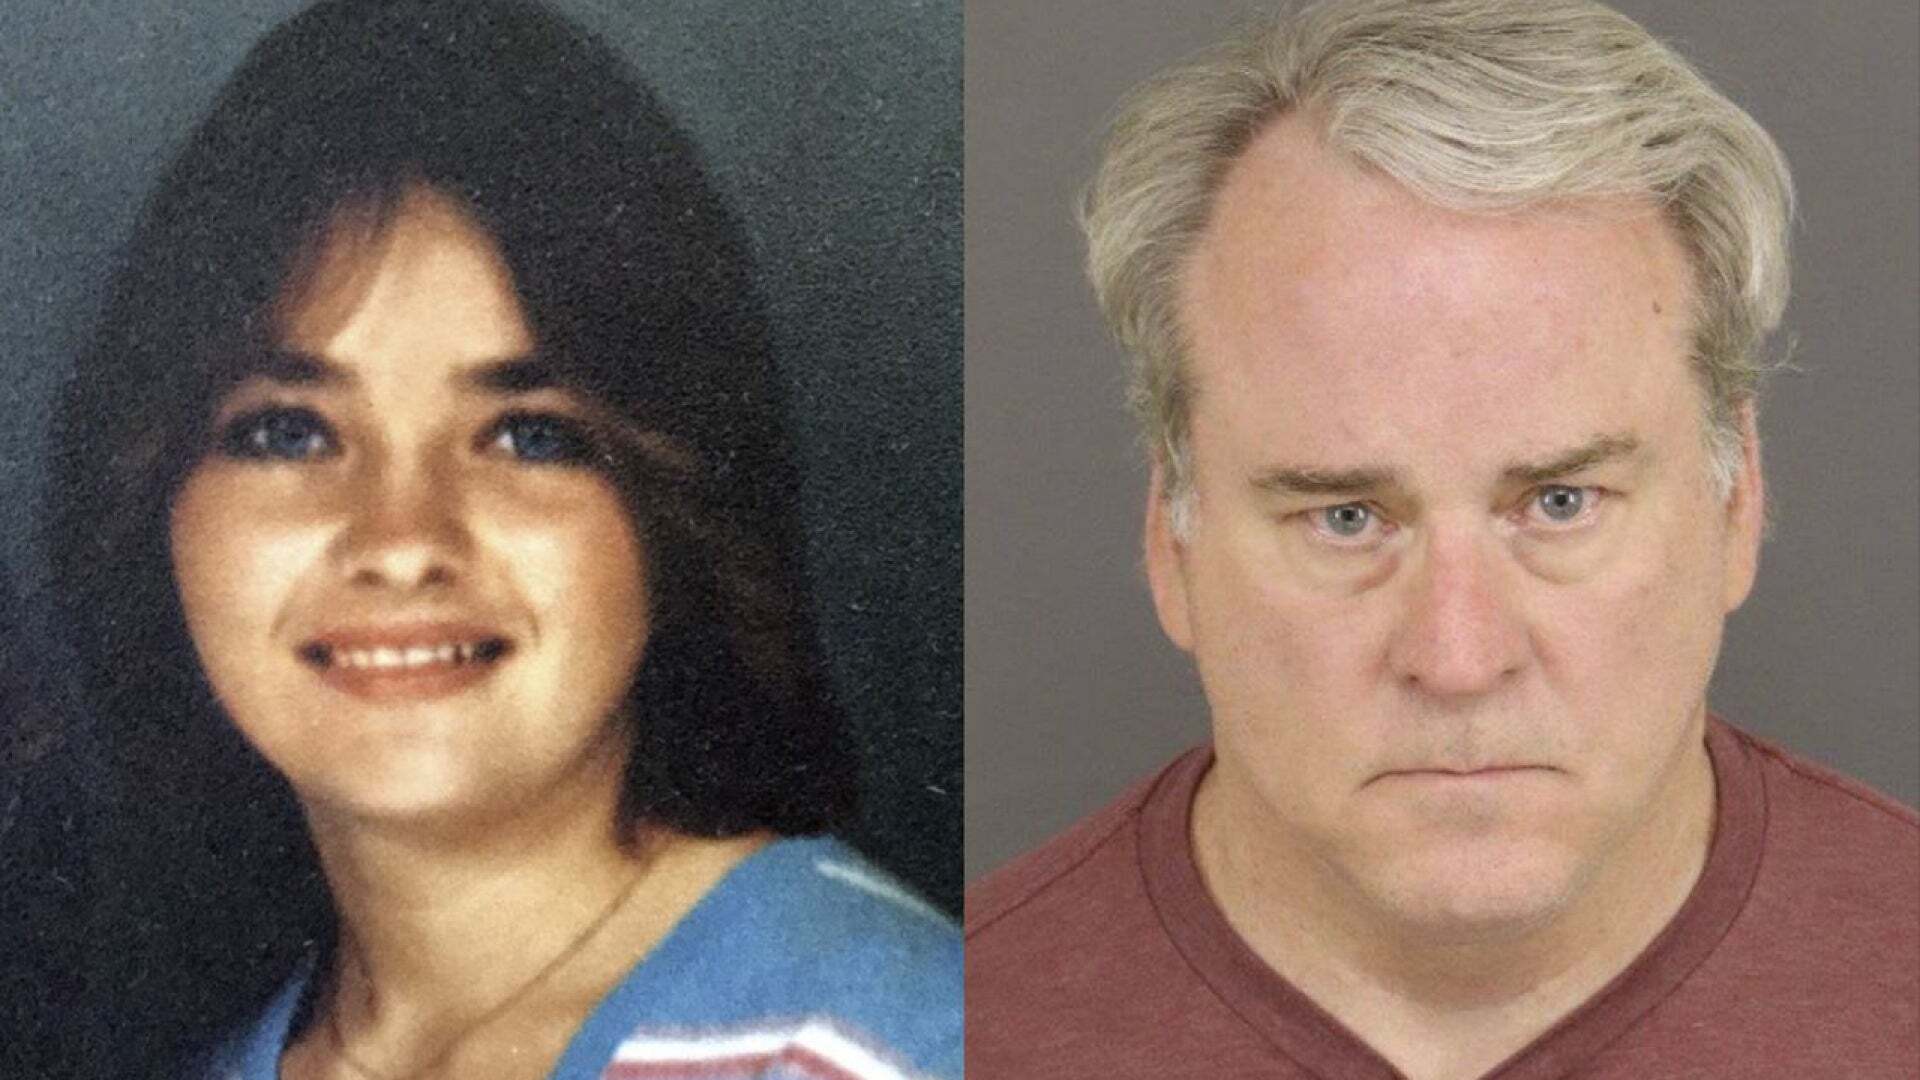 [IMAGE] Colorado Man Sentenced to Life in Prison After DNA Links Him to 1987 Rape and Murder